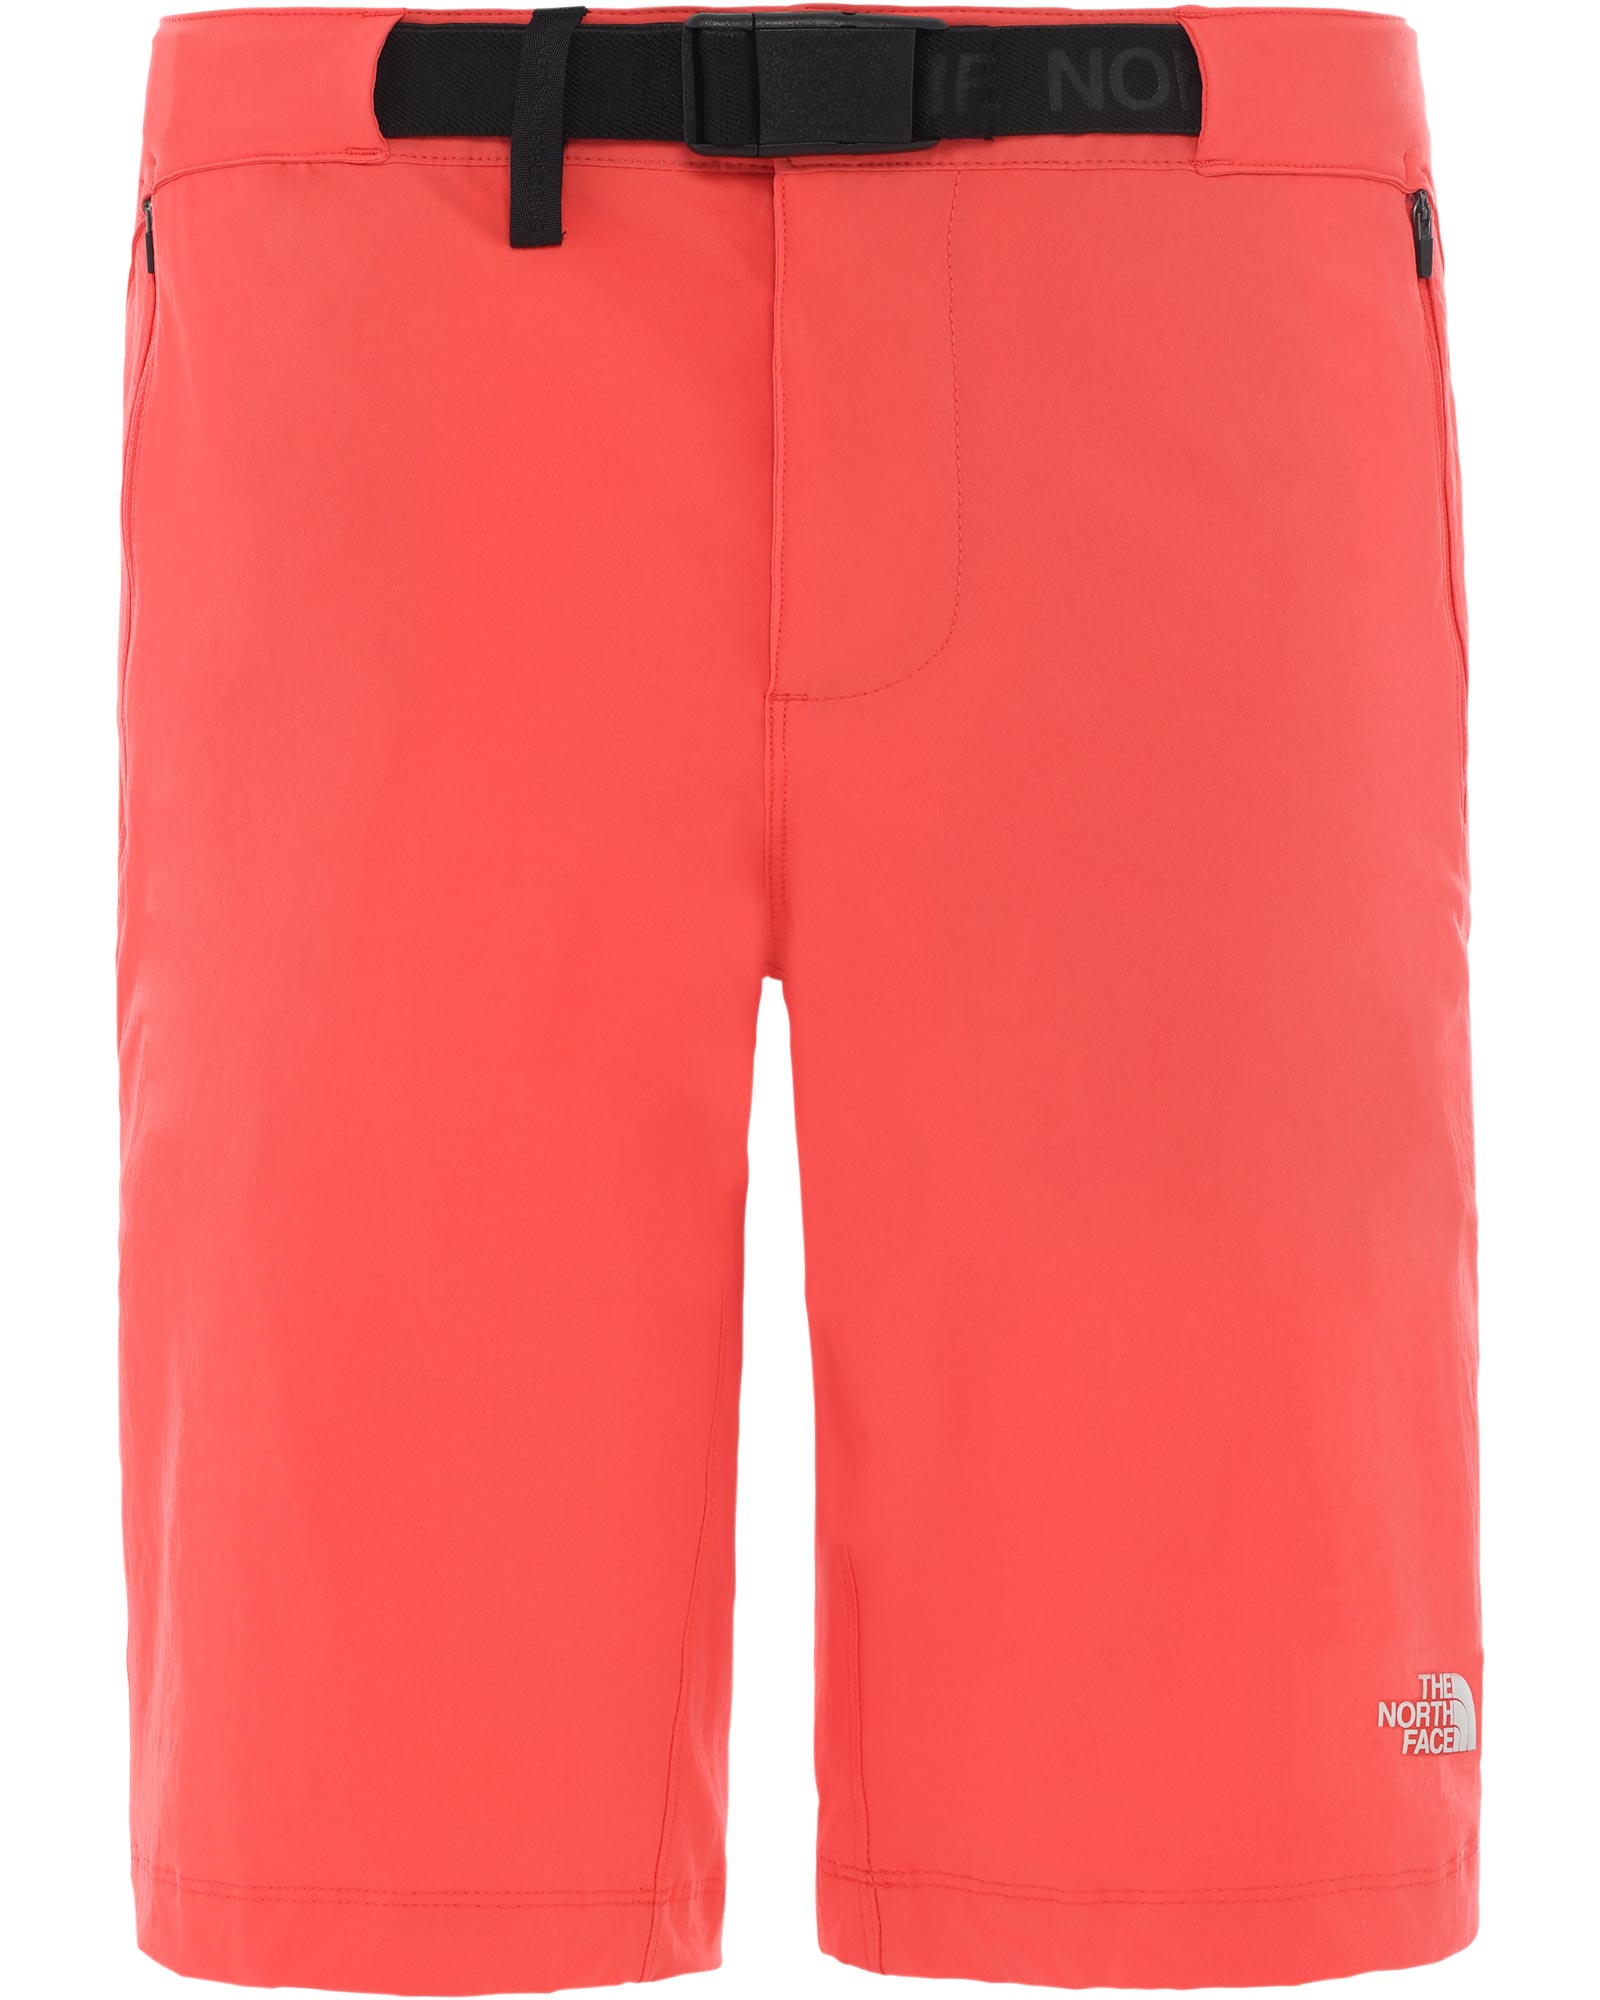 The North Face Speedlight Womens Shorts